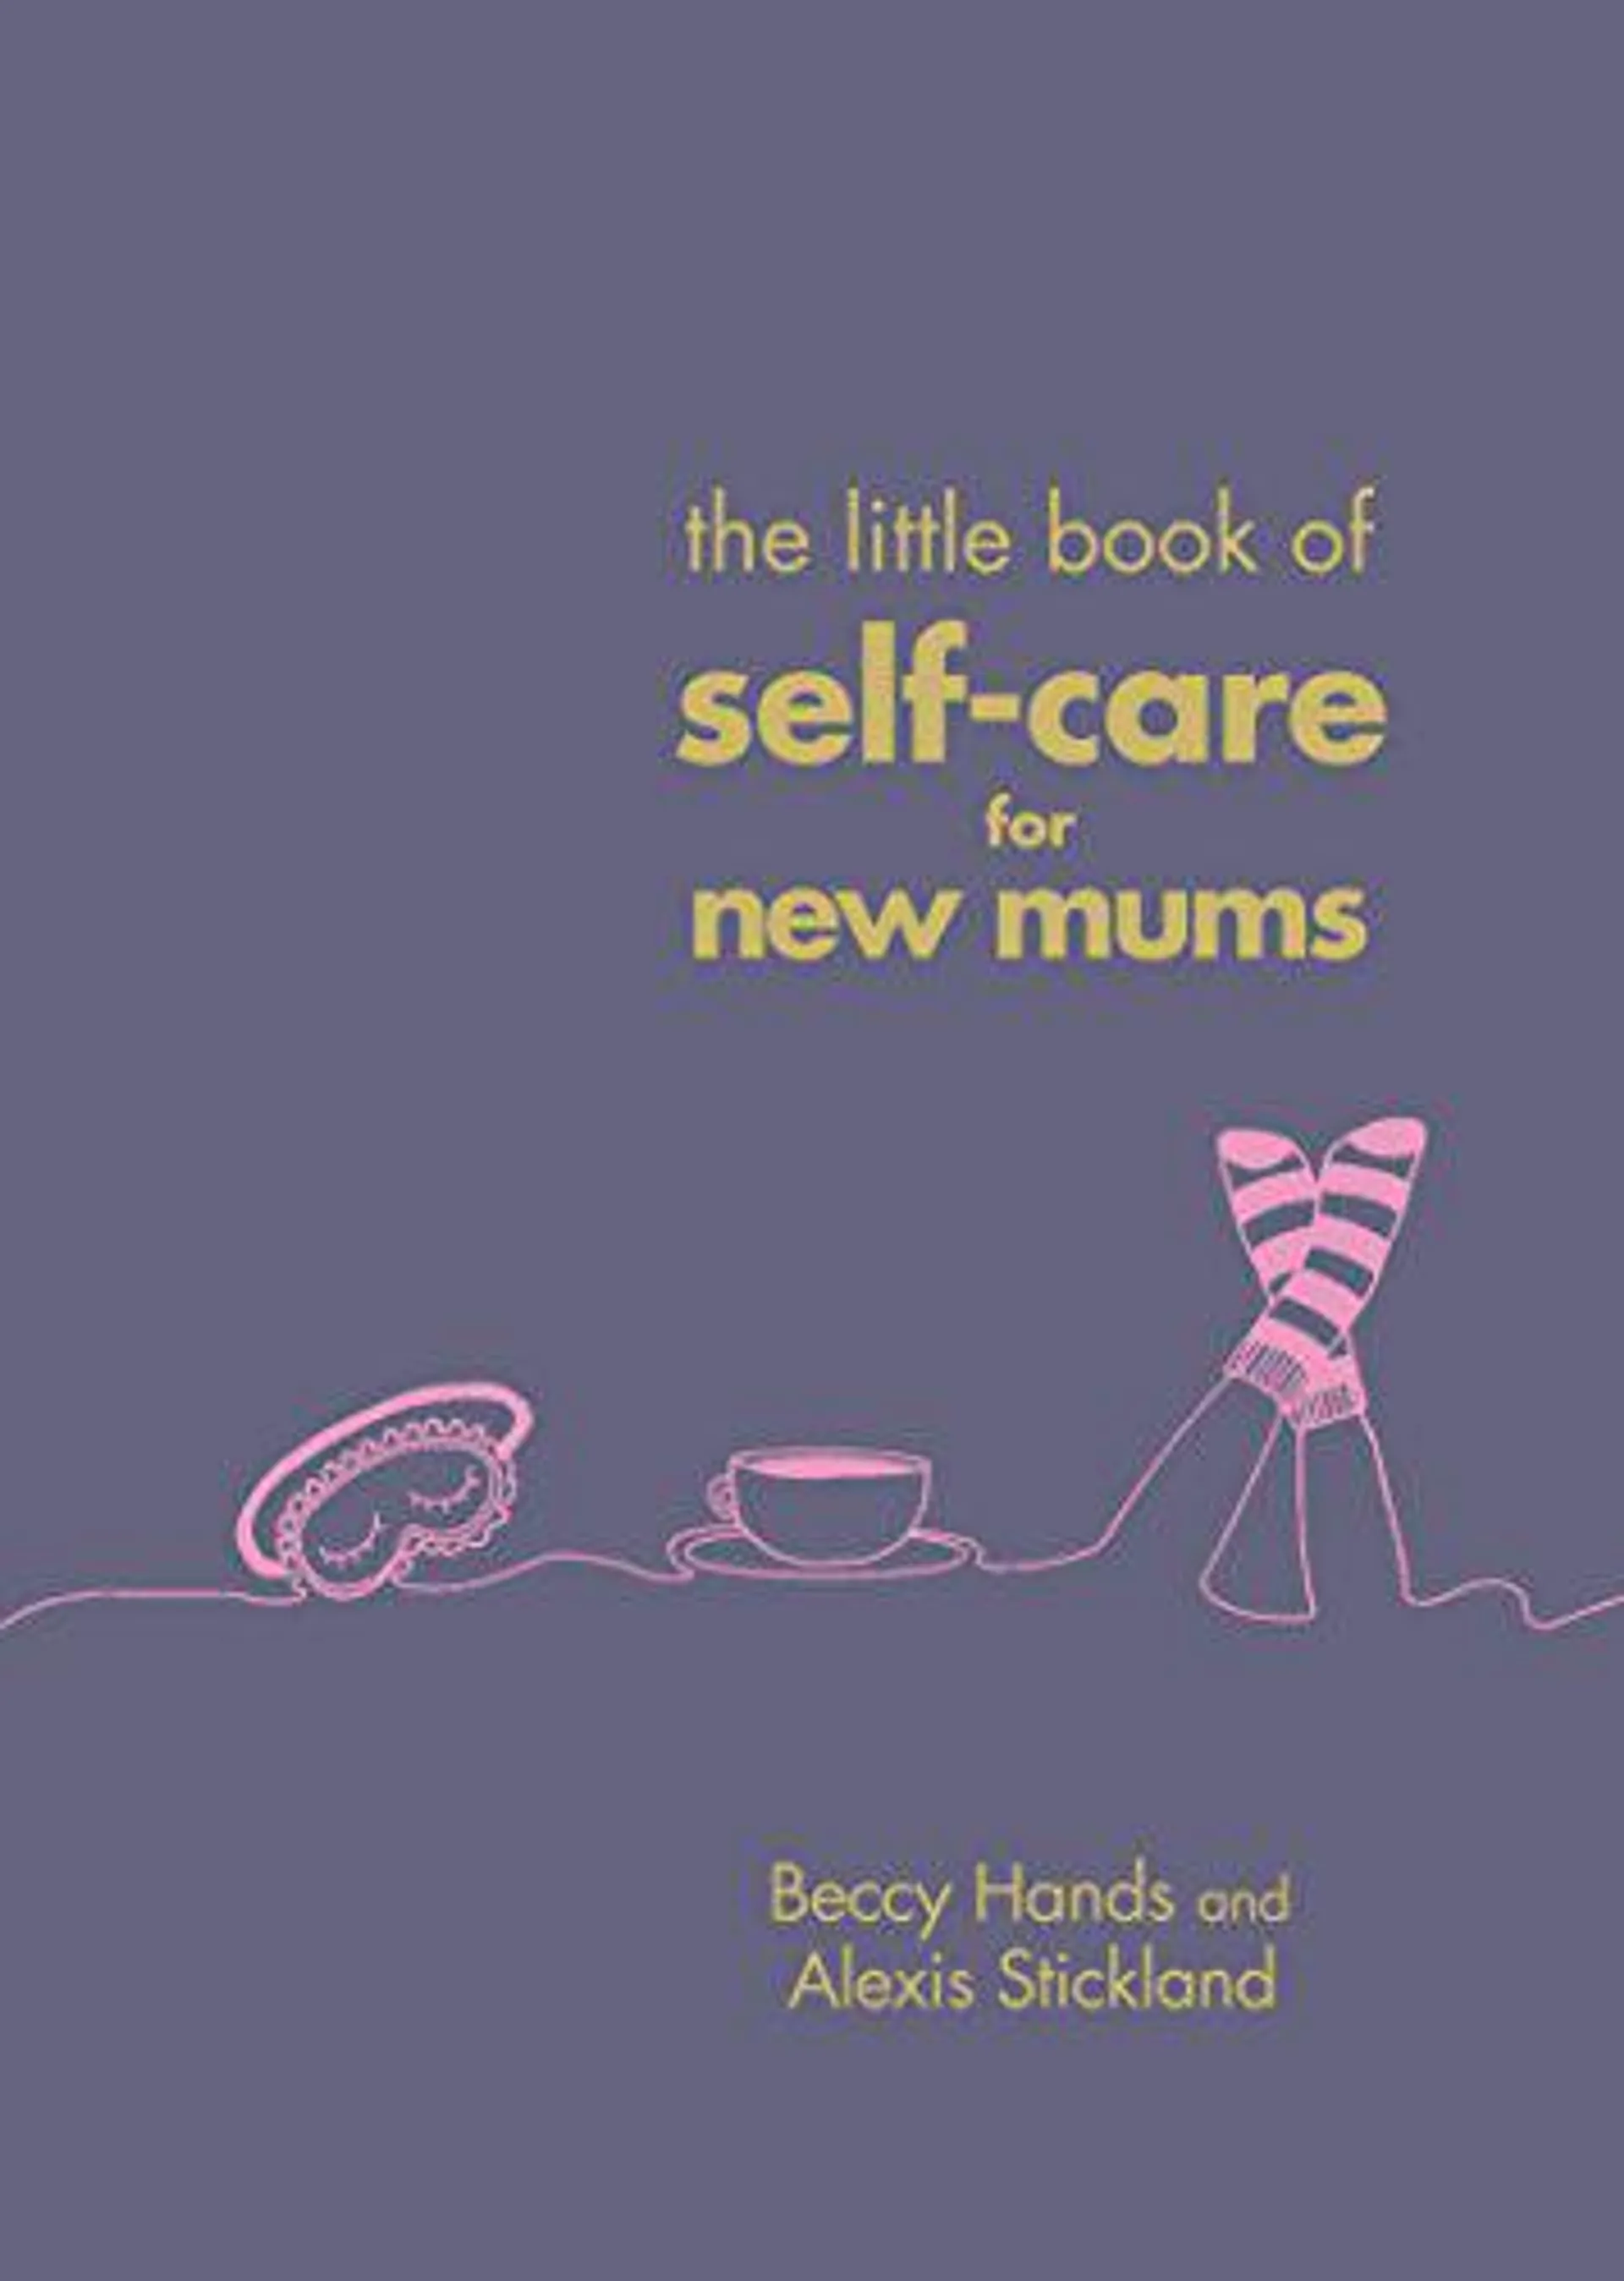 The Little Book of Self-Care for New Mums by Beccy Hands